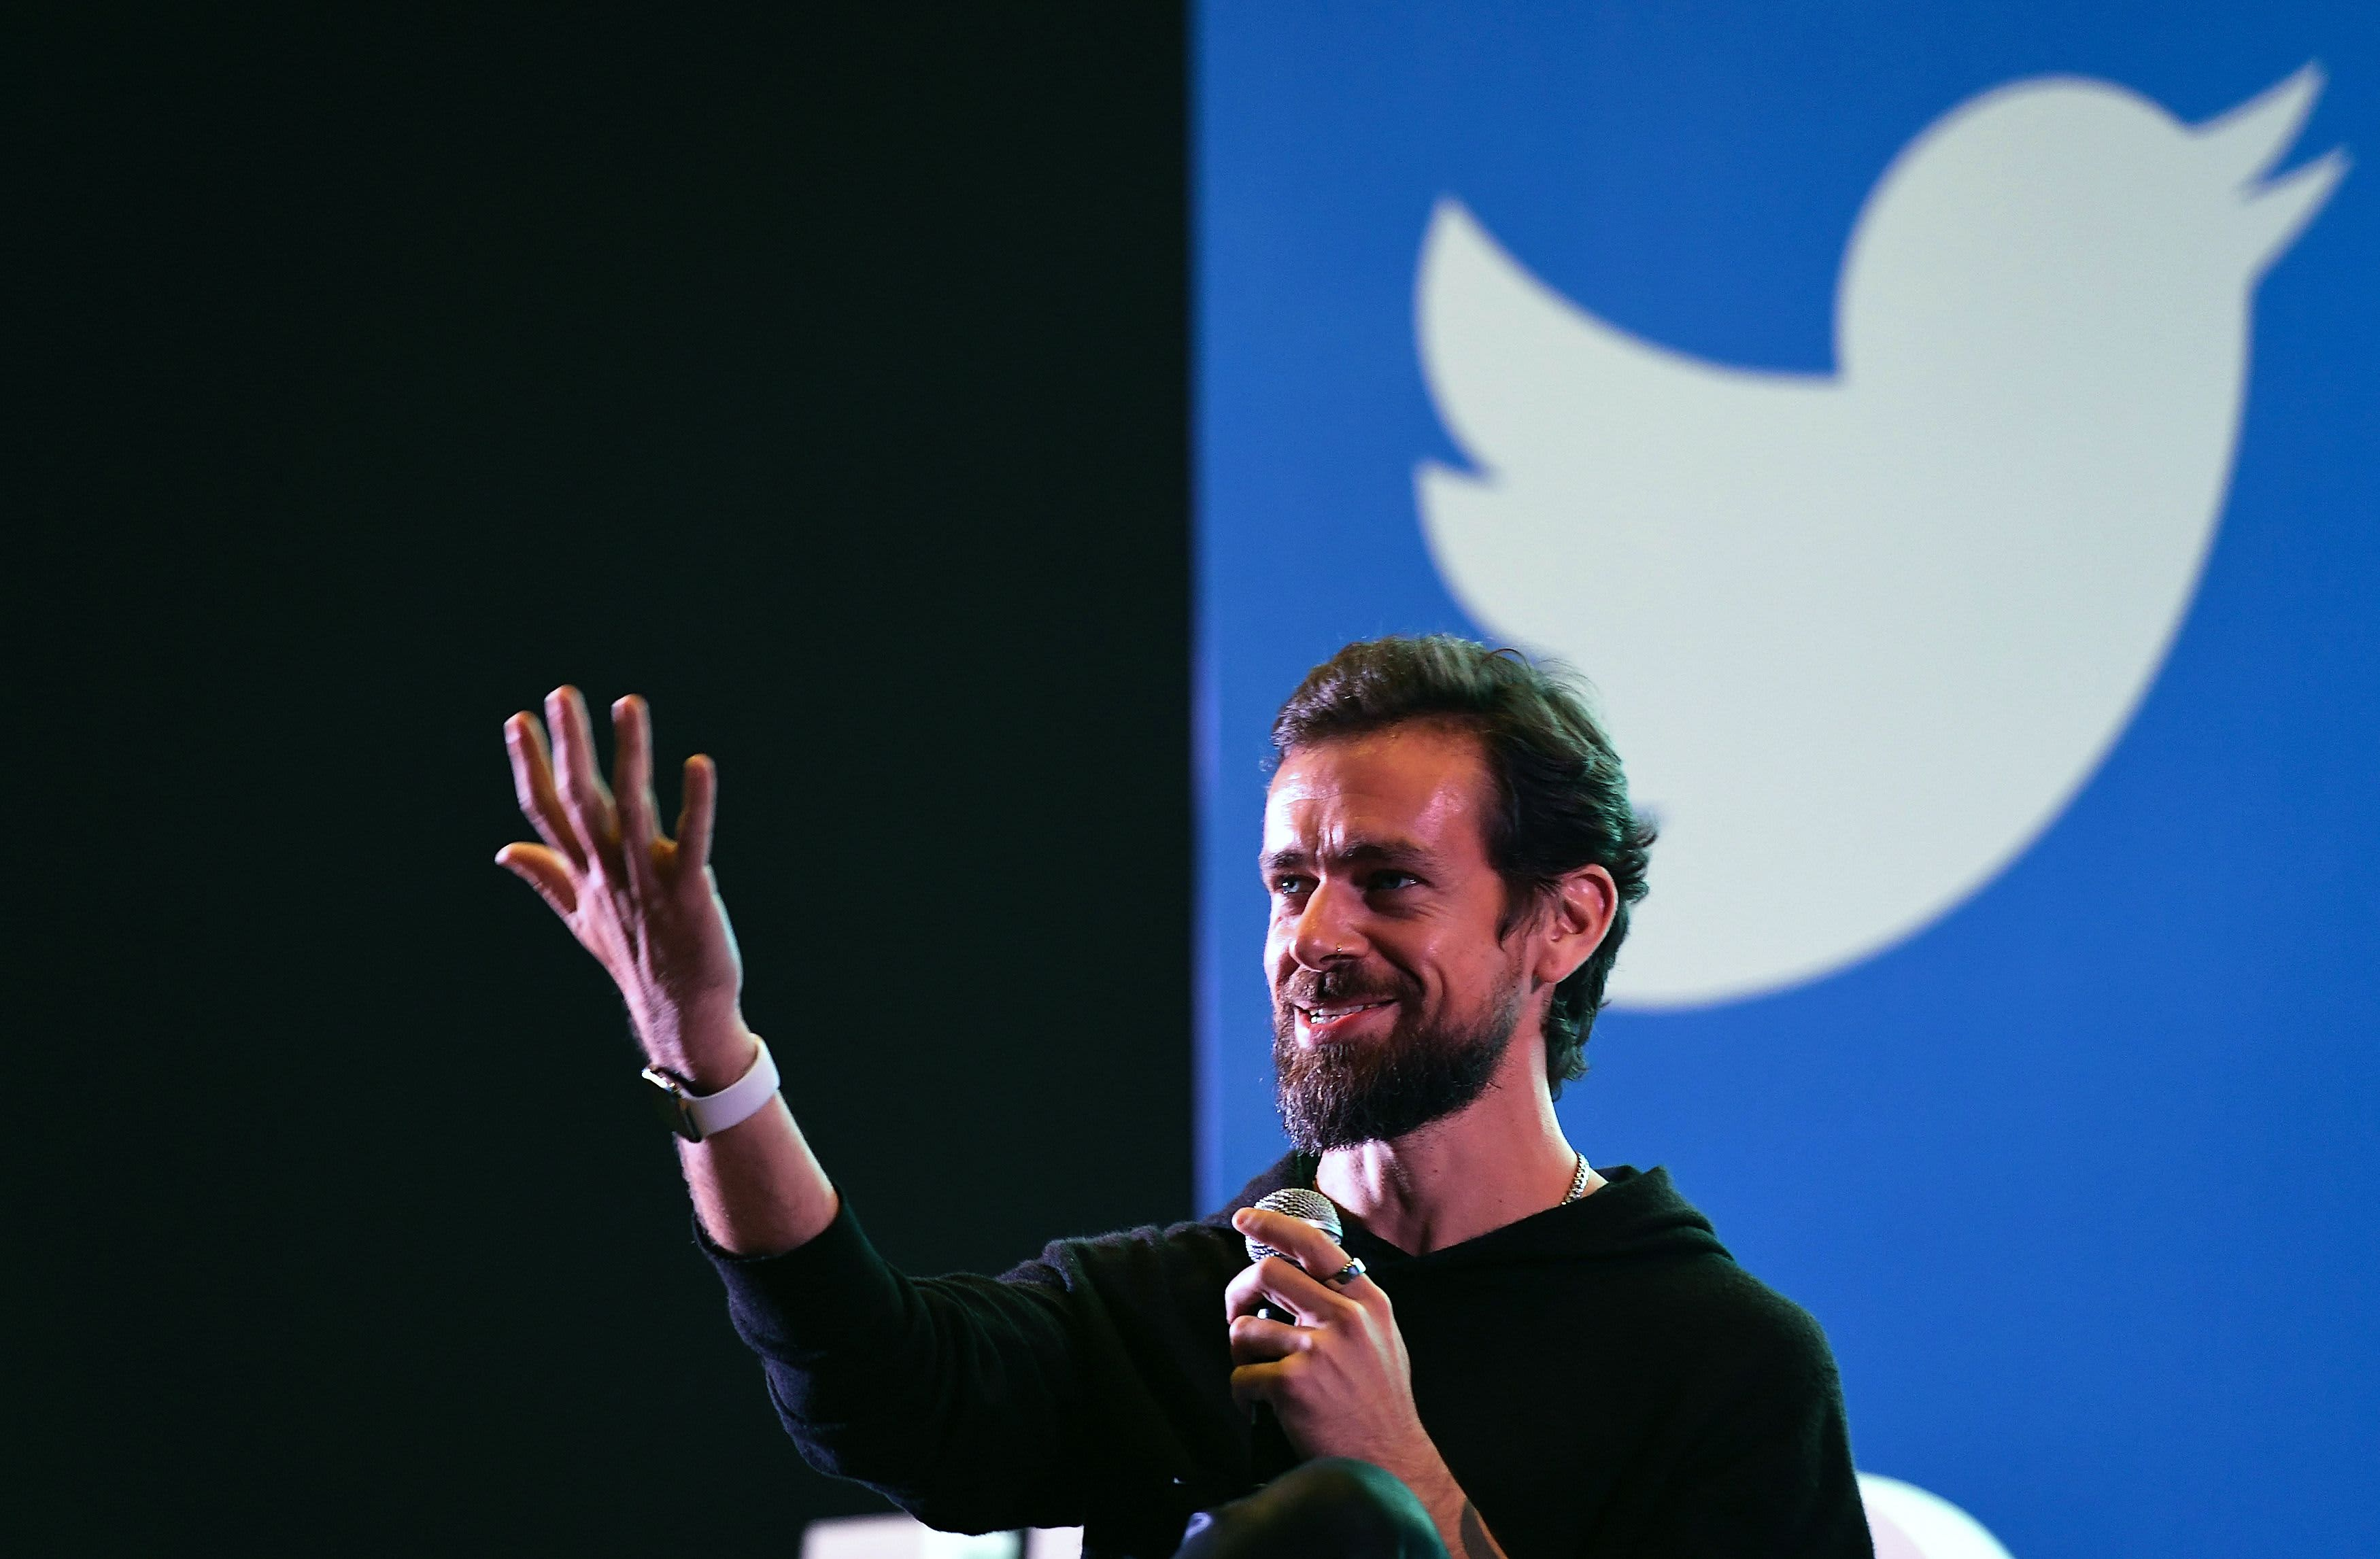 Jack Dorsey’s First Tweet’ NFT Went on Sale for $48M But It Came To A Close With A Top Bid Of Only $280.